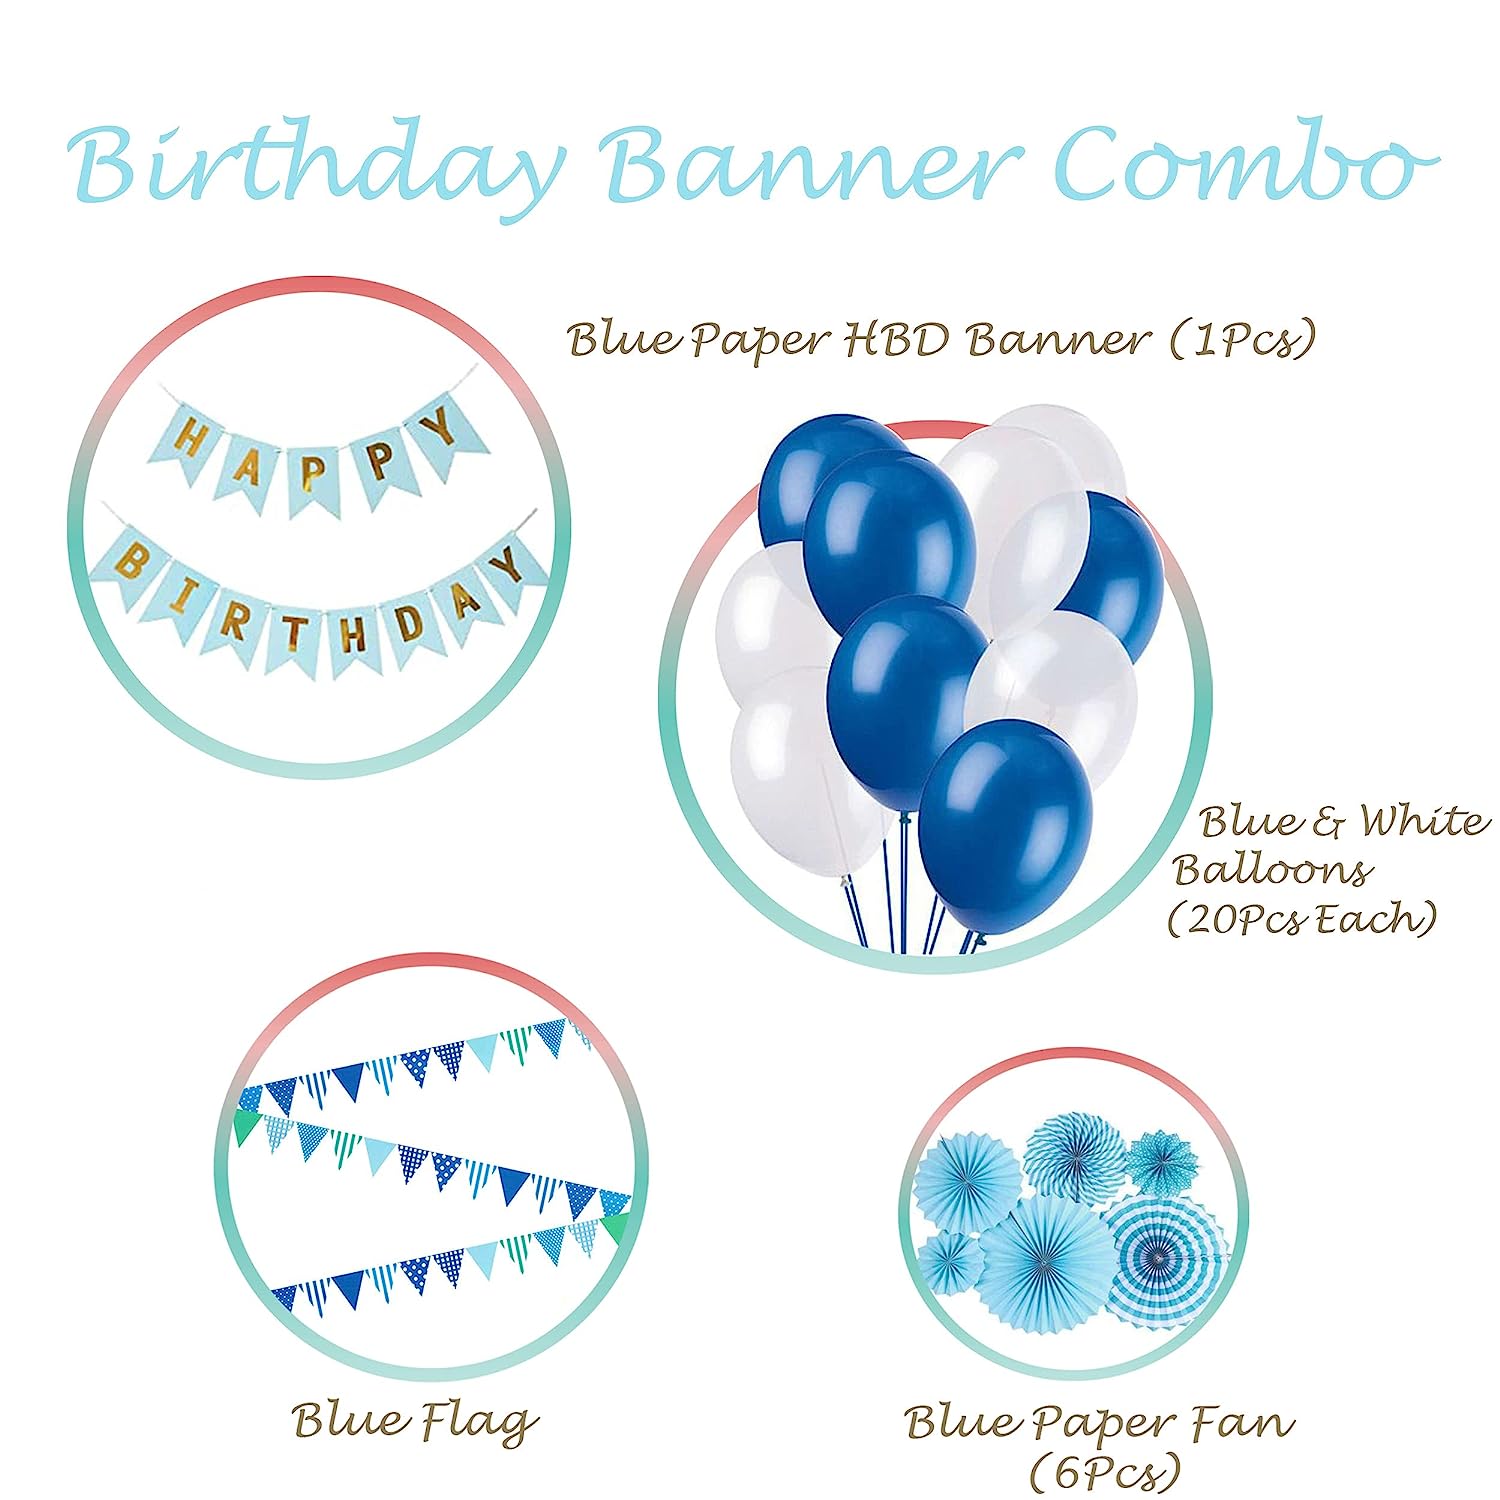 Blue Theme Birthday decoration items with paper flag and fans- 28 Items